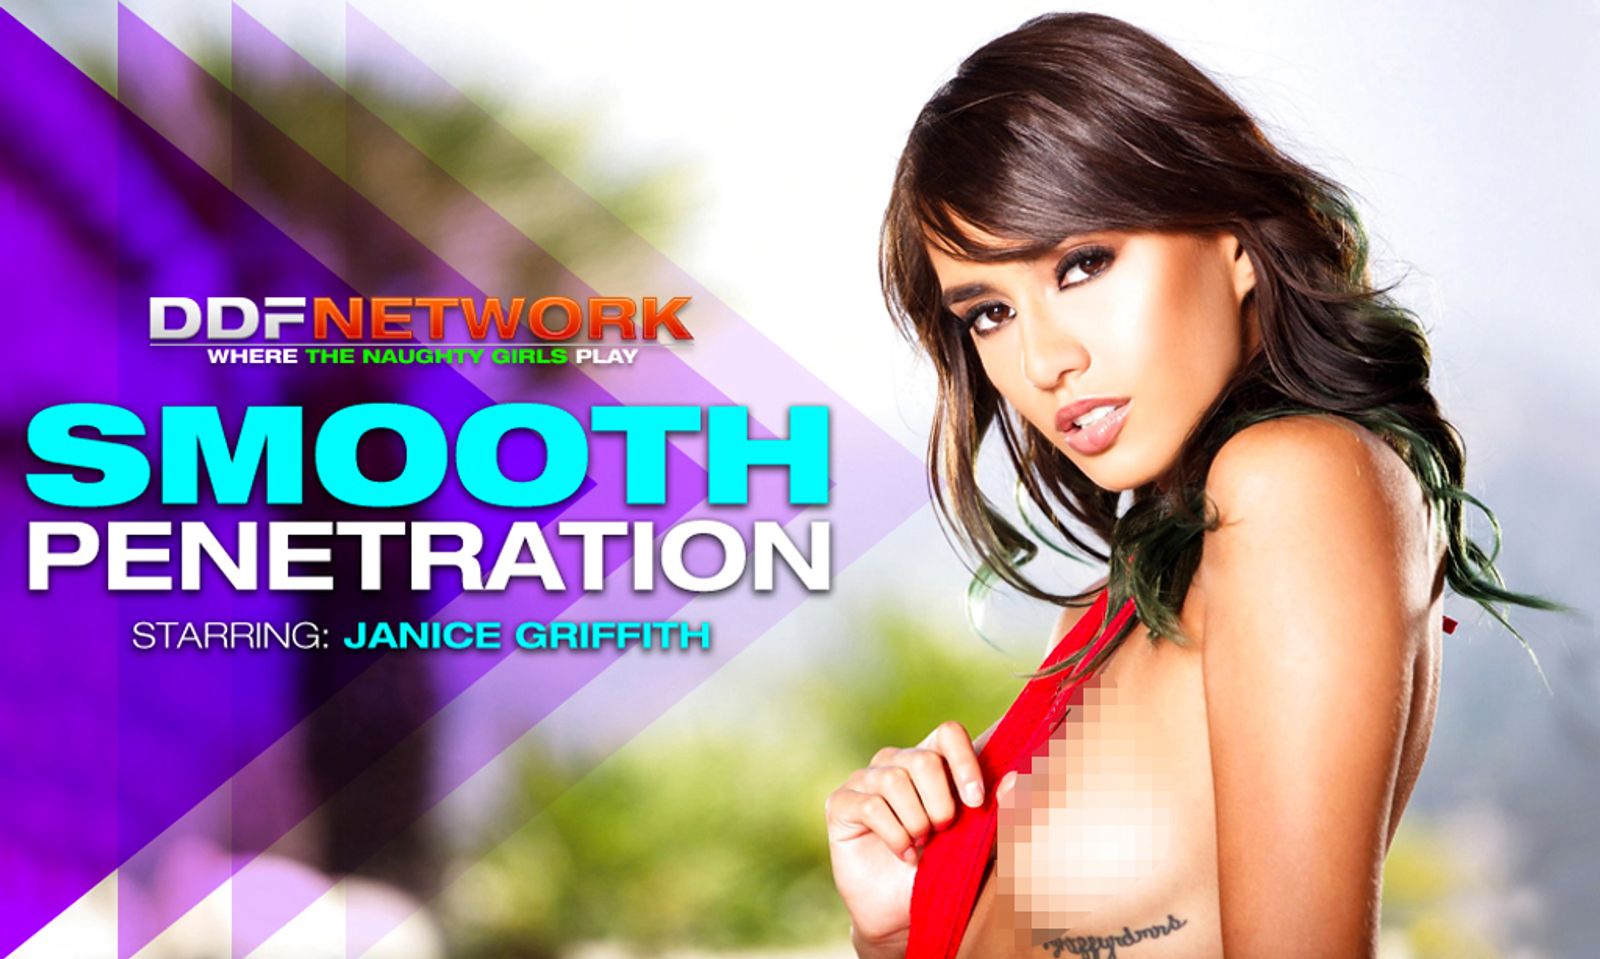 Janice Griffith Makes Debut on DDF Network